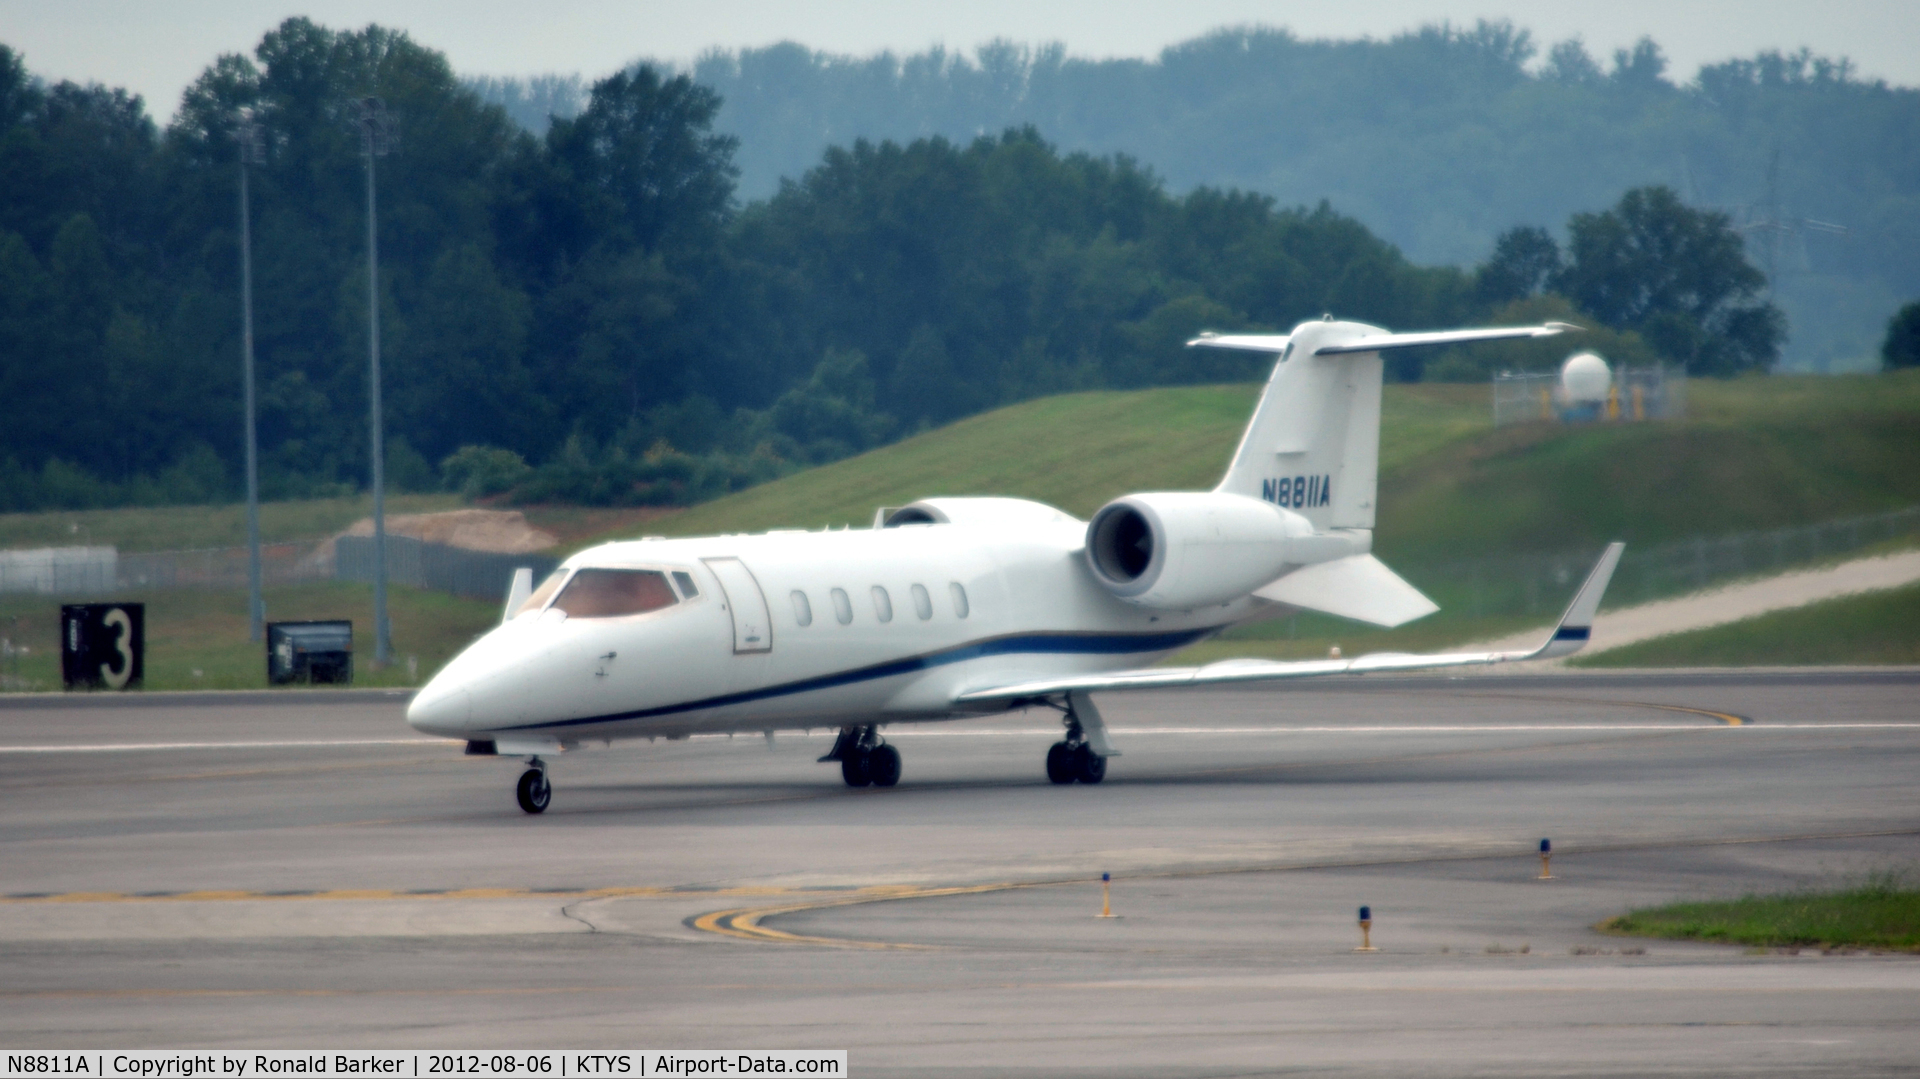 N8811A, 1998 Learjet 60 C/N 119, Knoxville